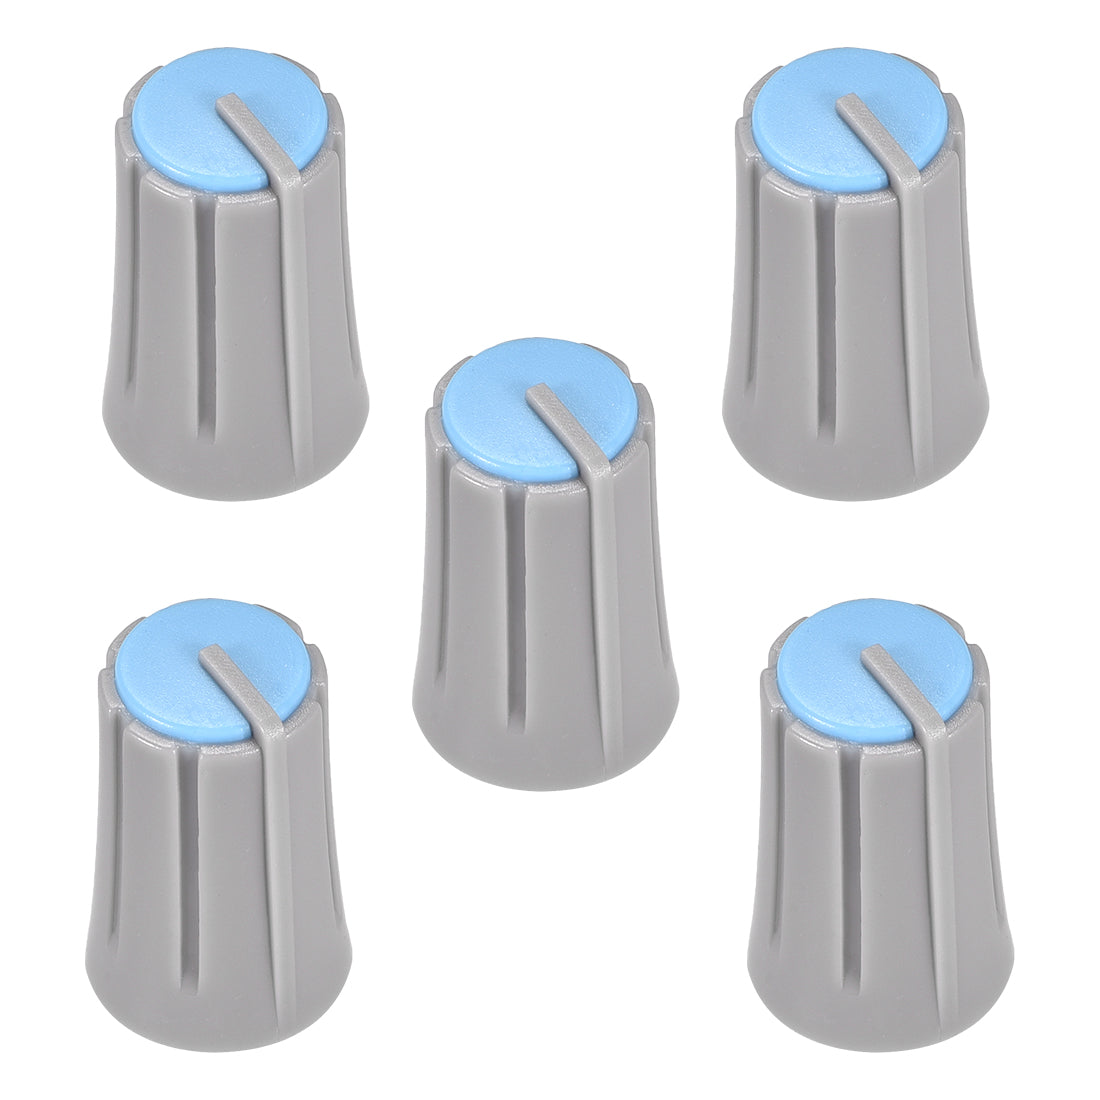 uxcell Uxcell 5pcs,4x6mm Potentiometer Control Knobs for Electric Guitar Grey Blue